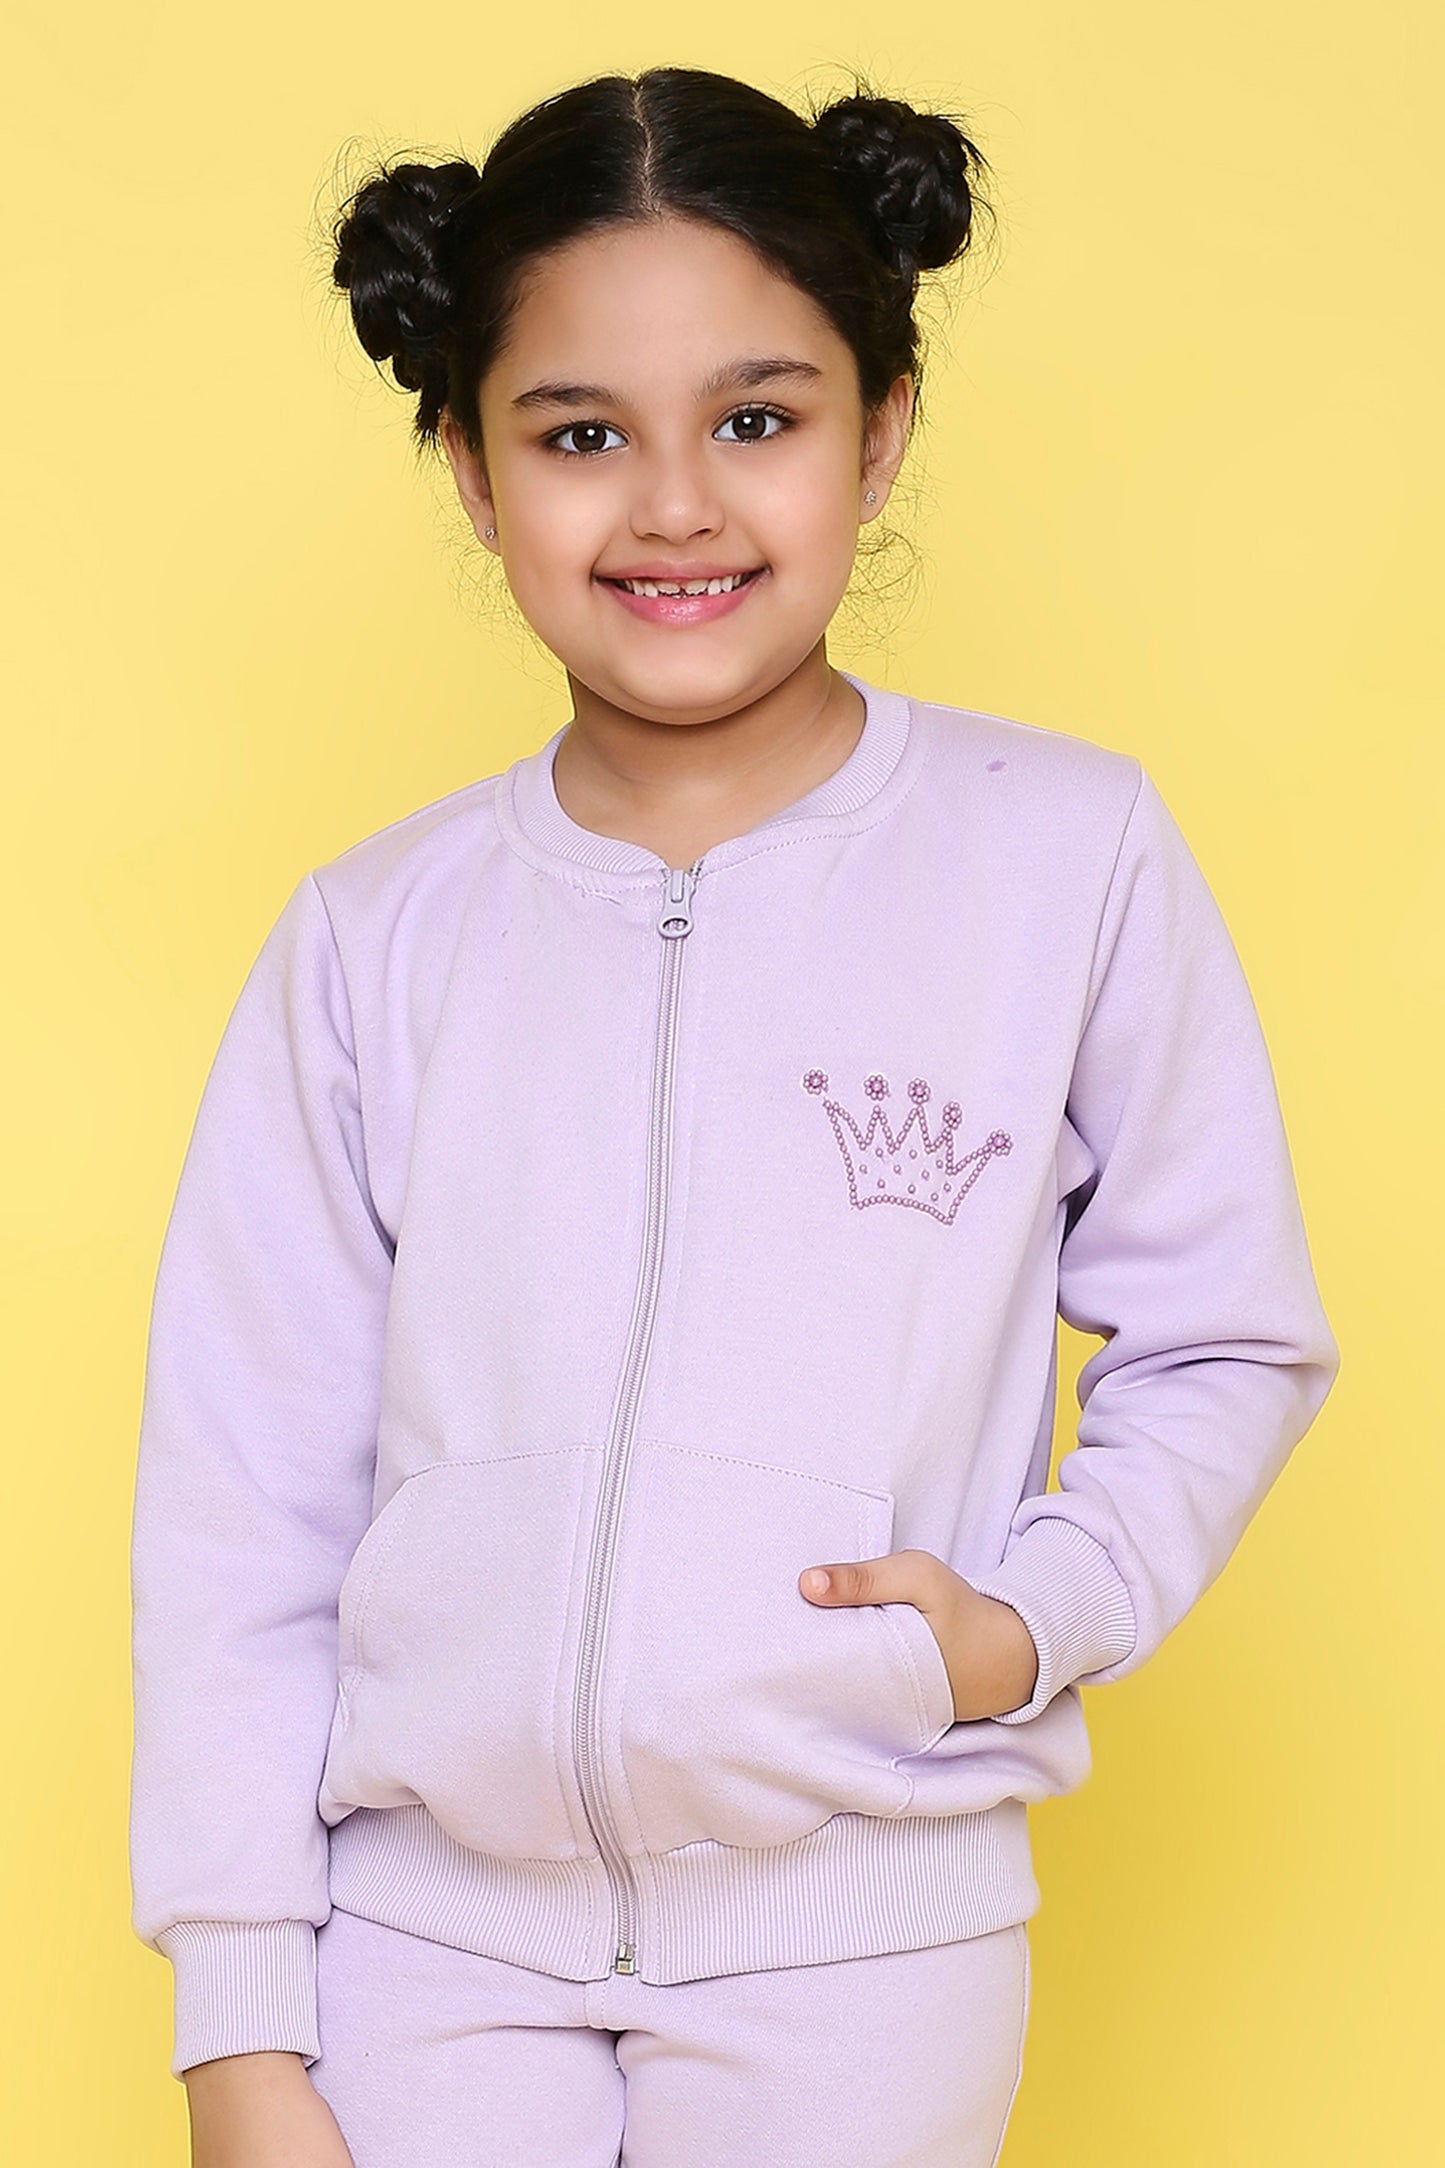 Knitting Doodles Kids' Jacket with Warm Fleece and Pretty Crown Detailing- Purple